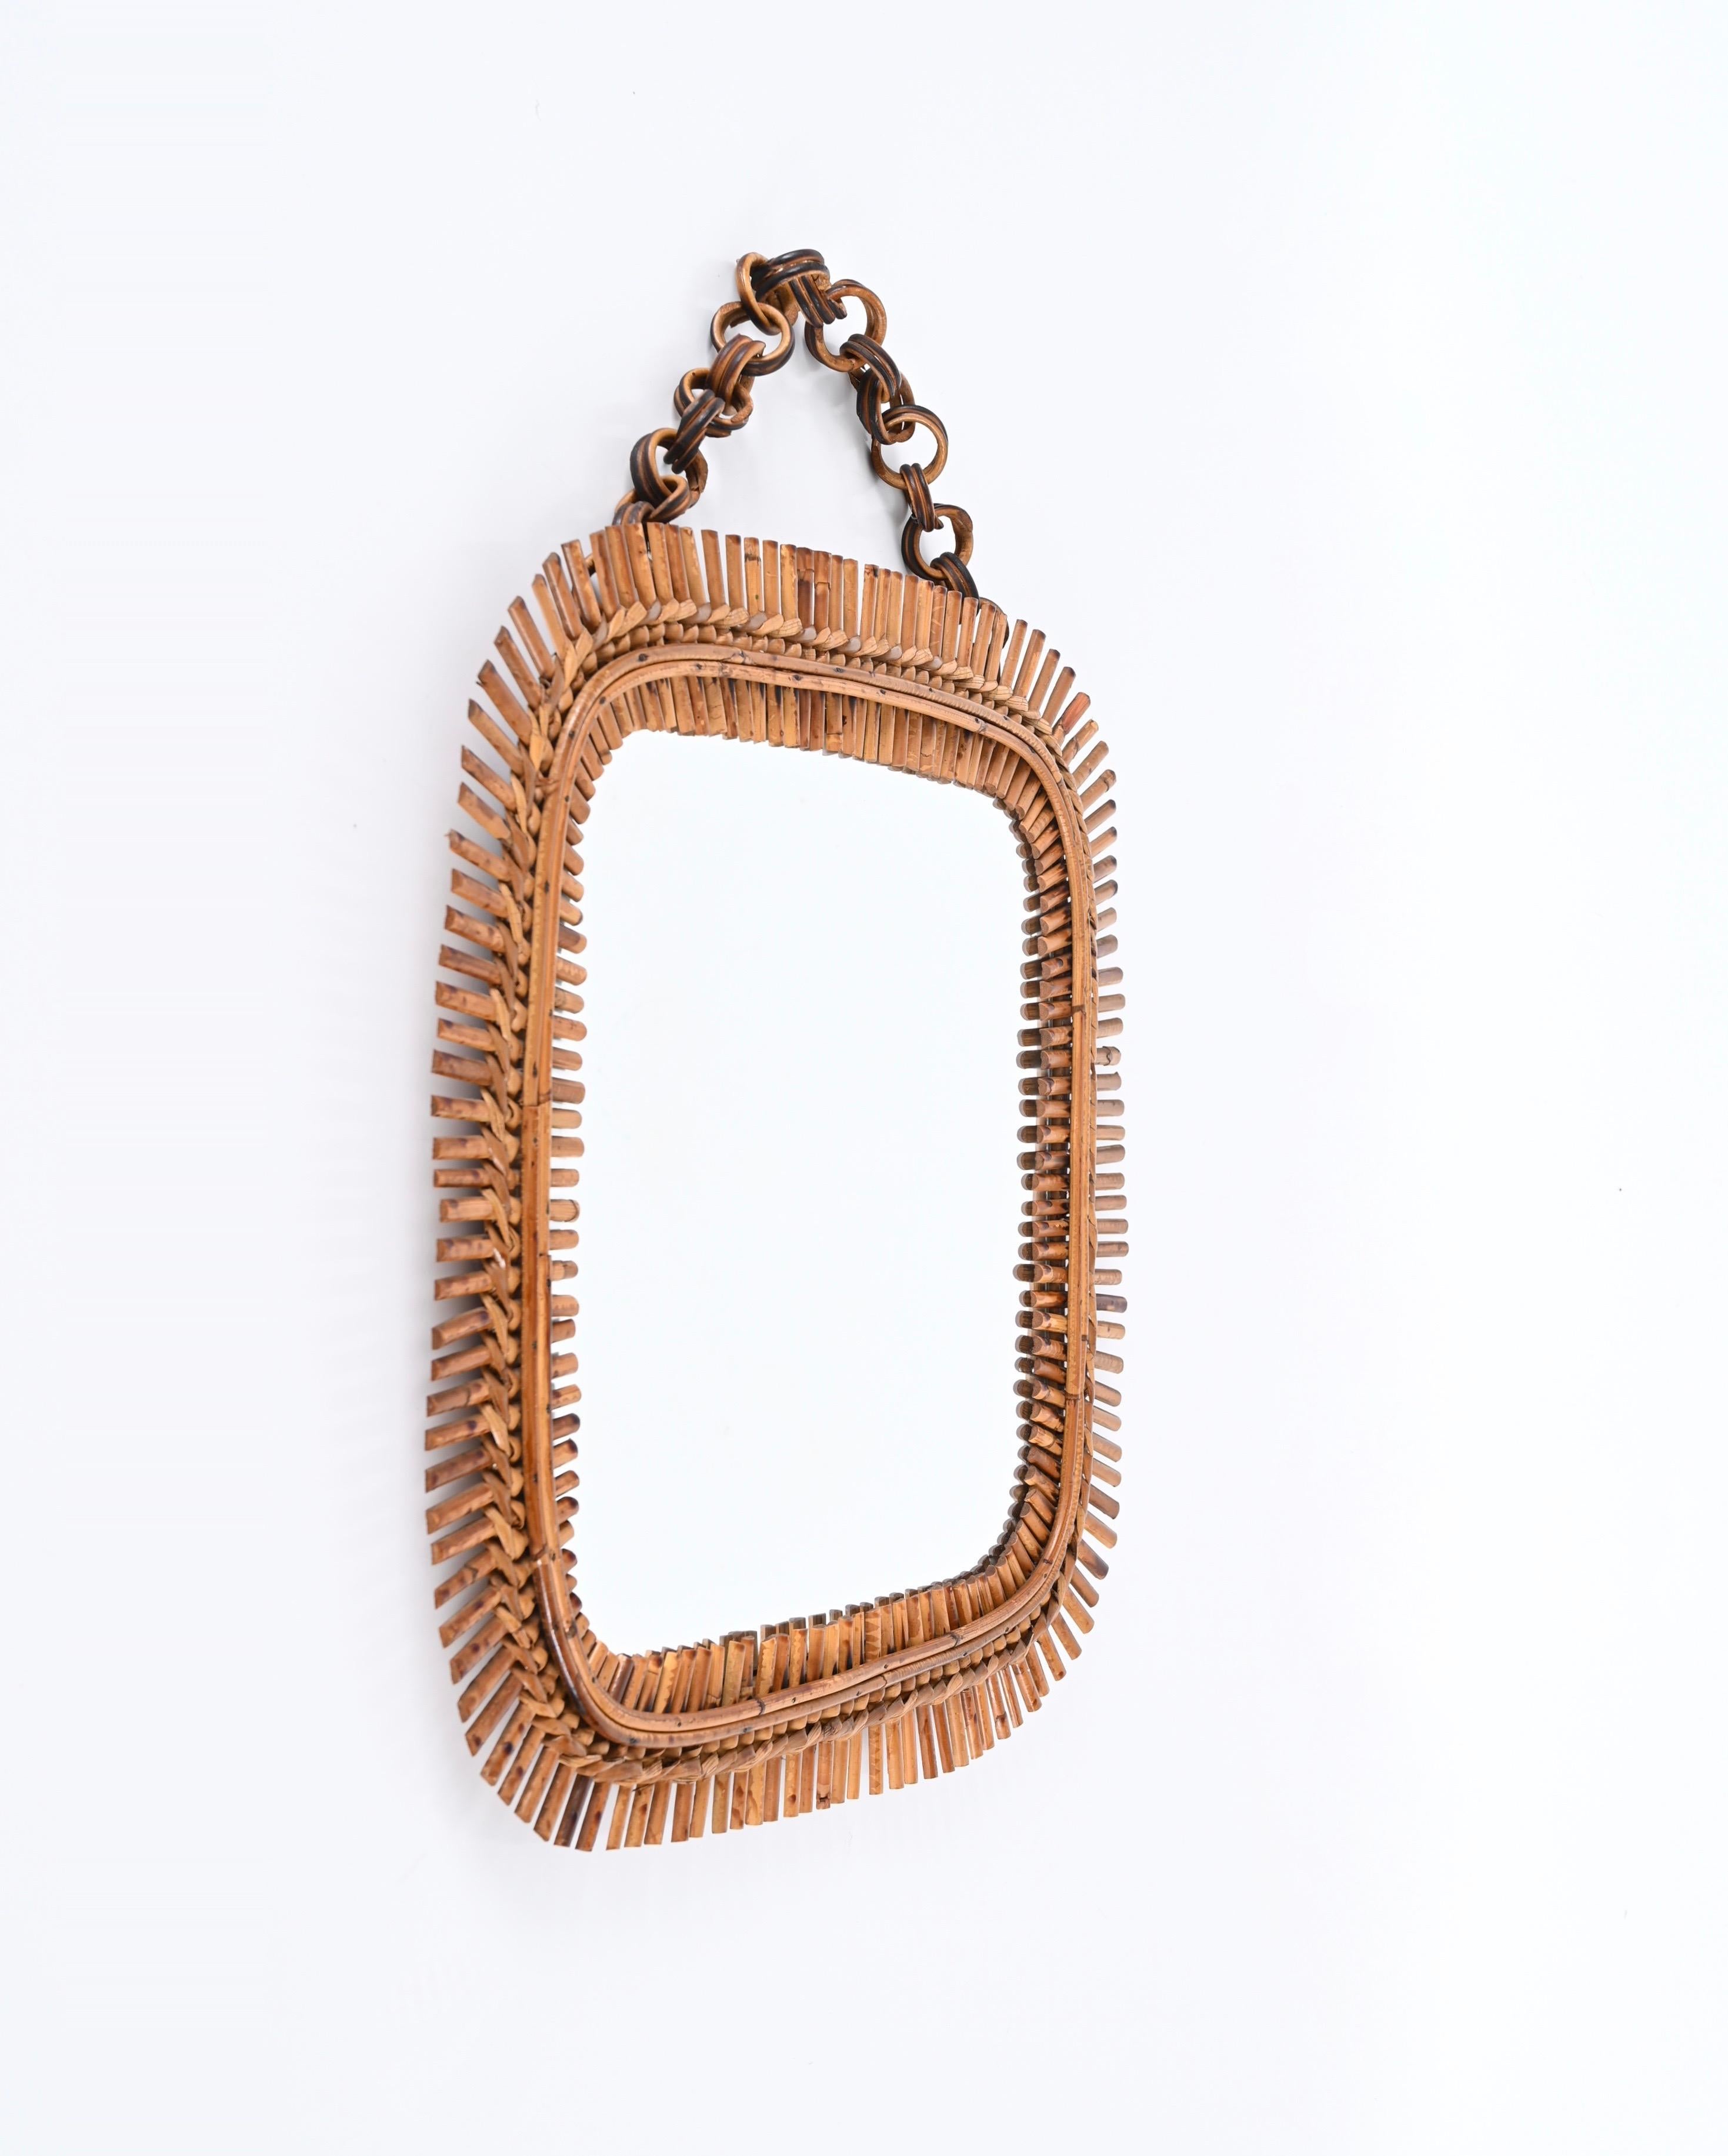 Italian Midcentury French Riviera Square Wall Mirror in Bamboo and Rattan, Italy 1960s For Sale